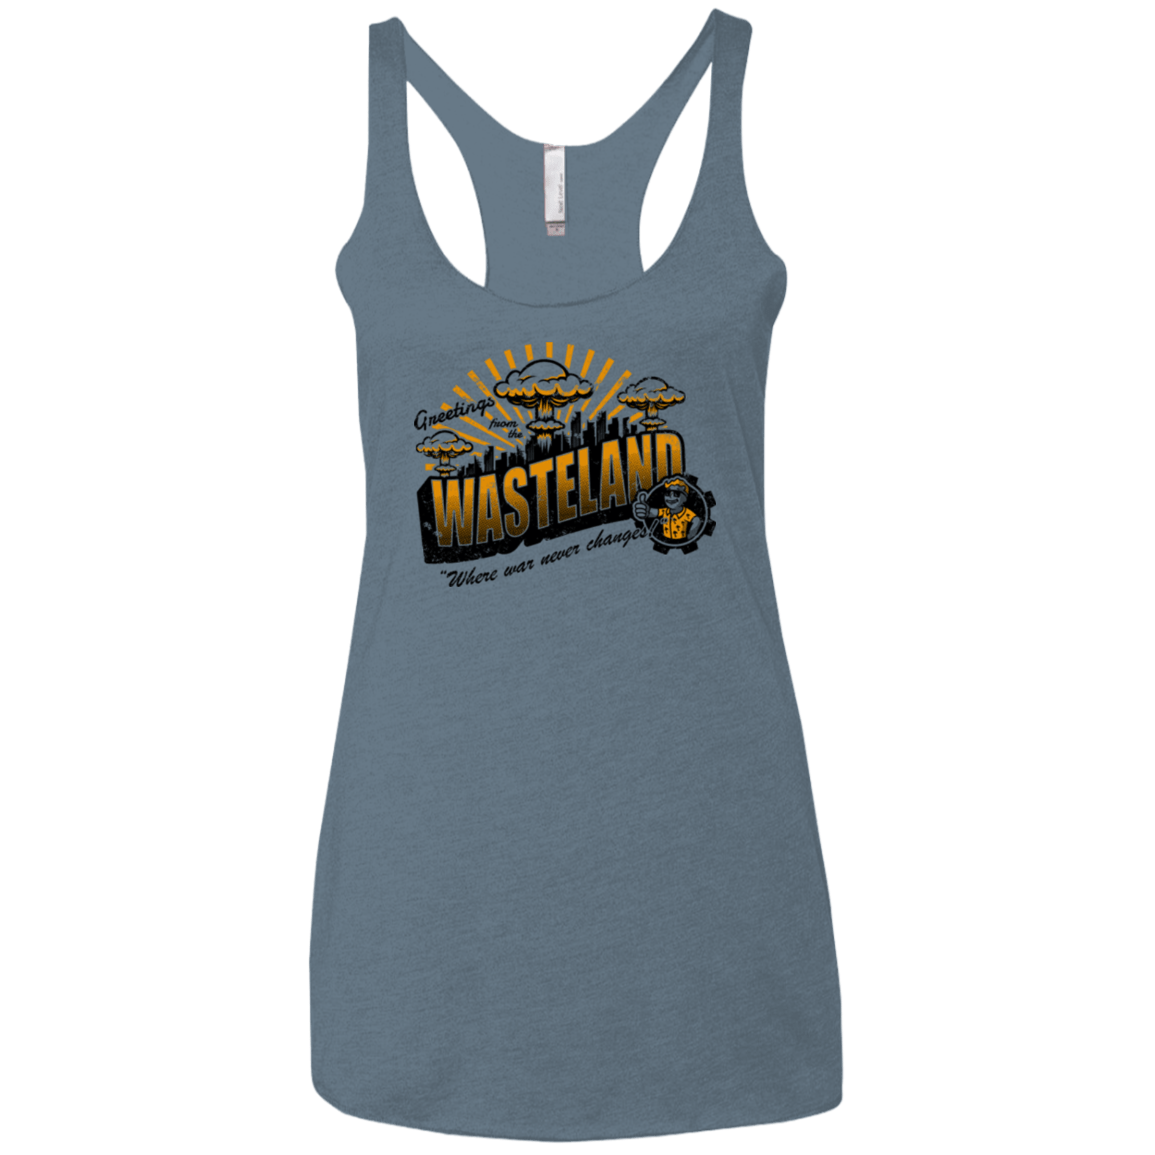 T-Shirts Indigo / X-Small Greetings from the Wasteland! Women's Triblend Racerback Tank